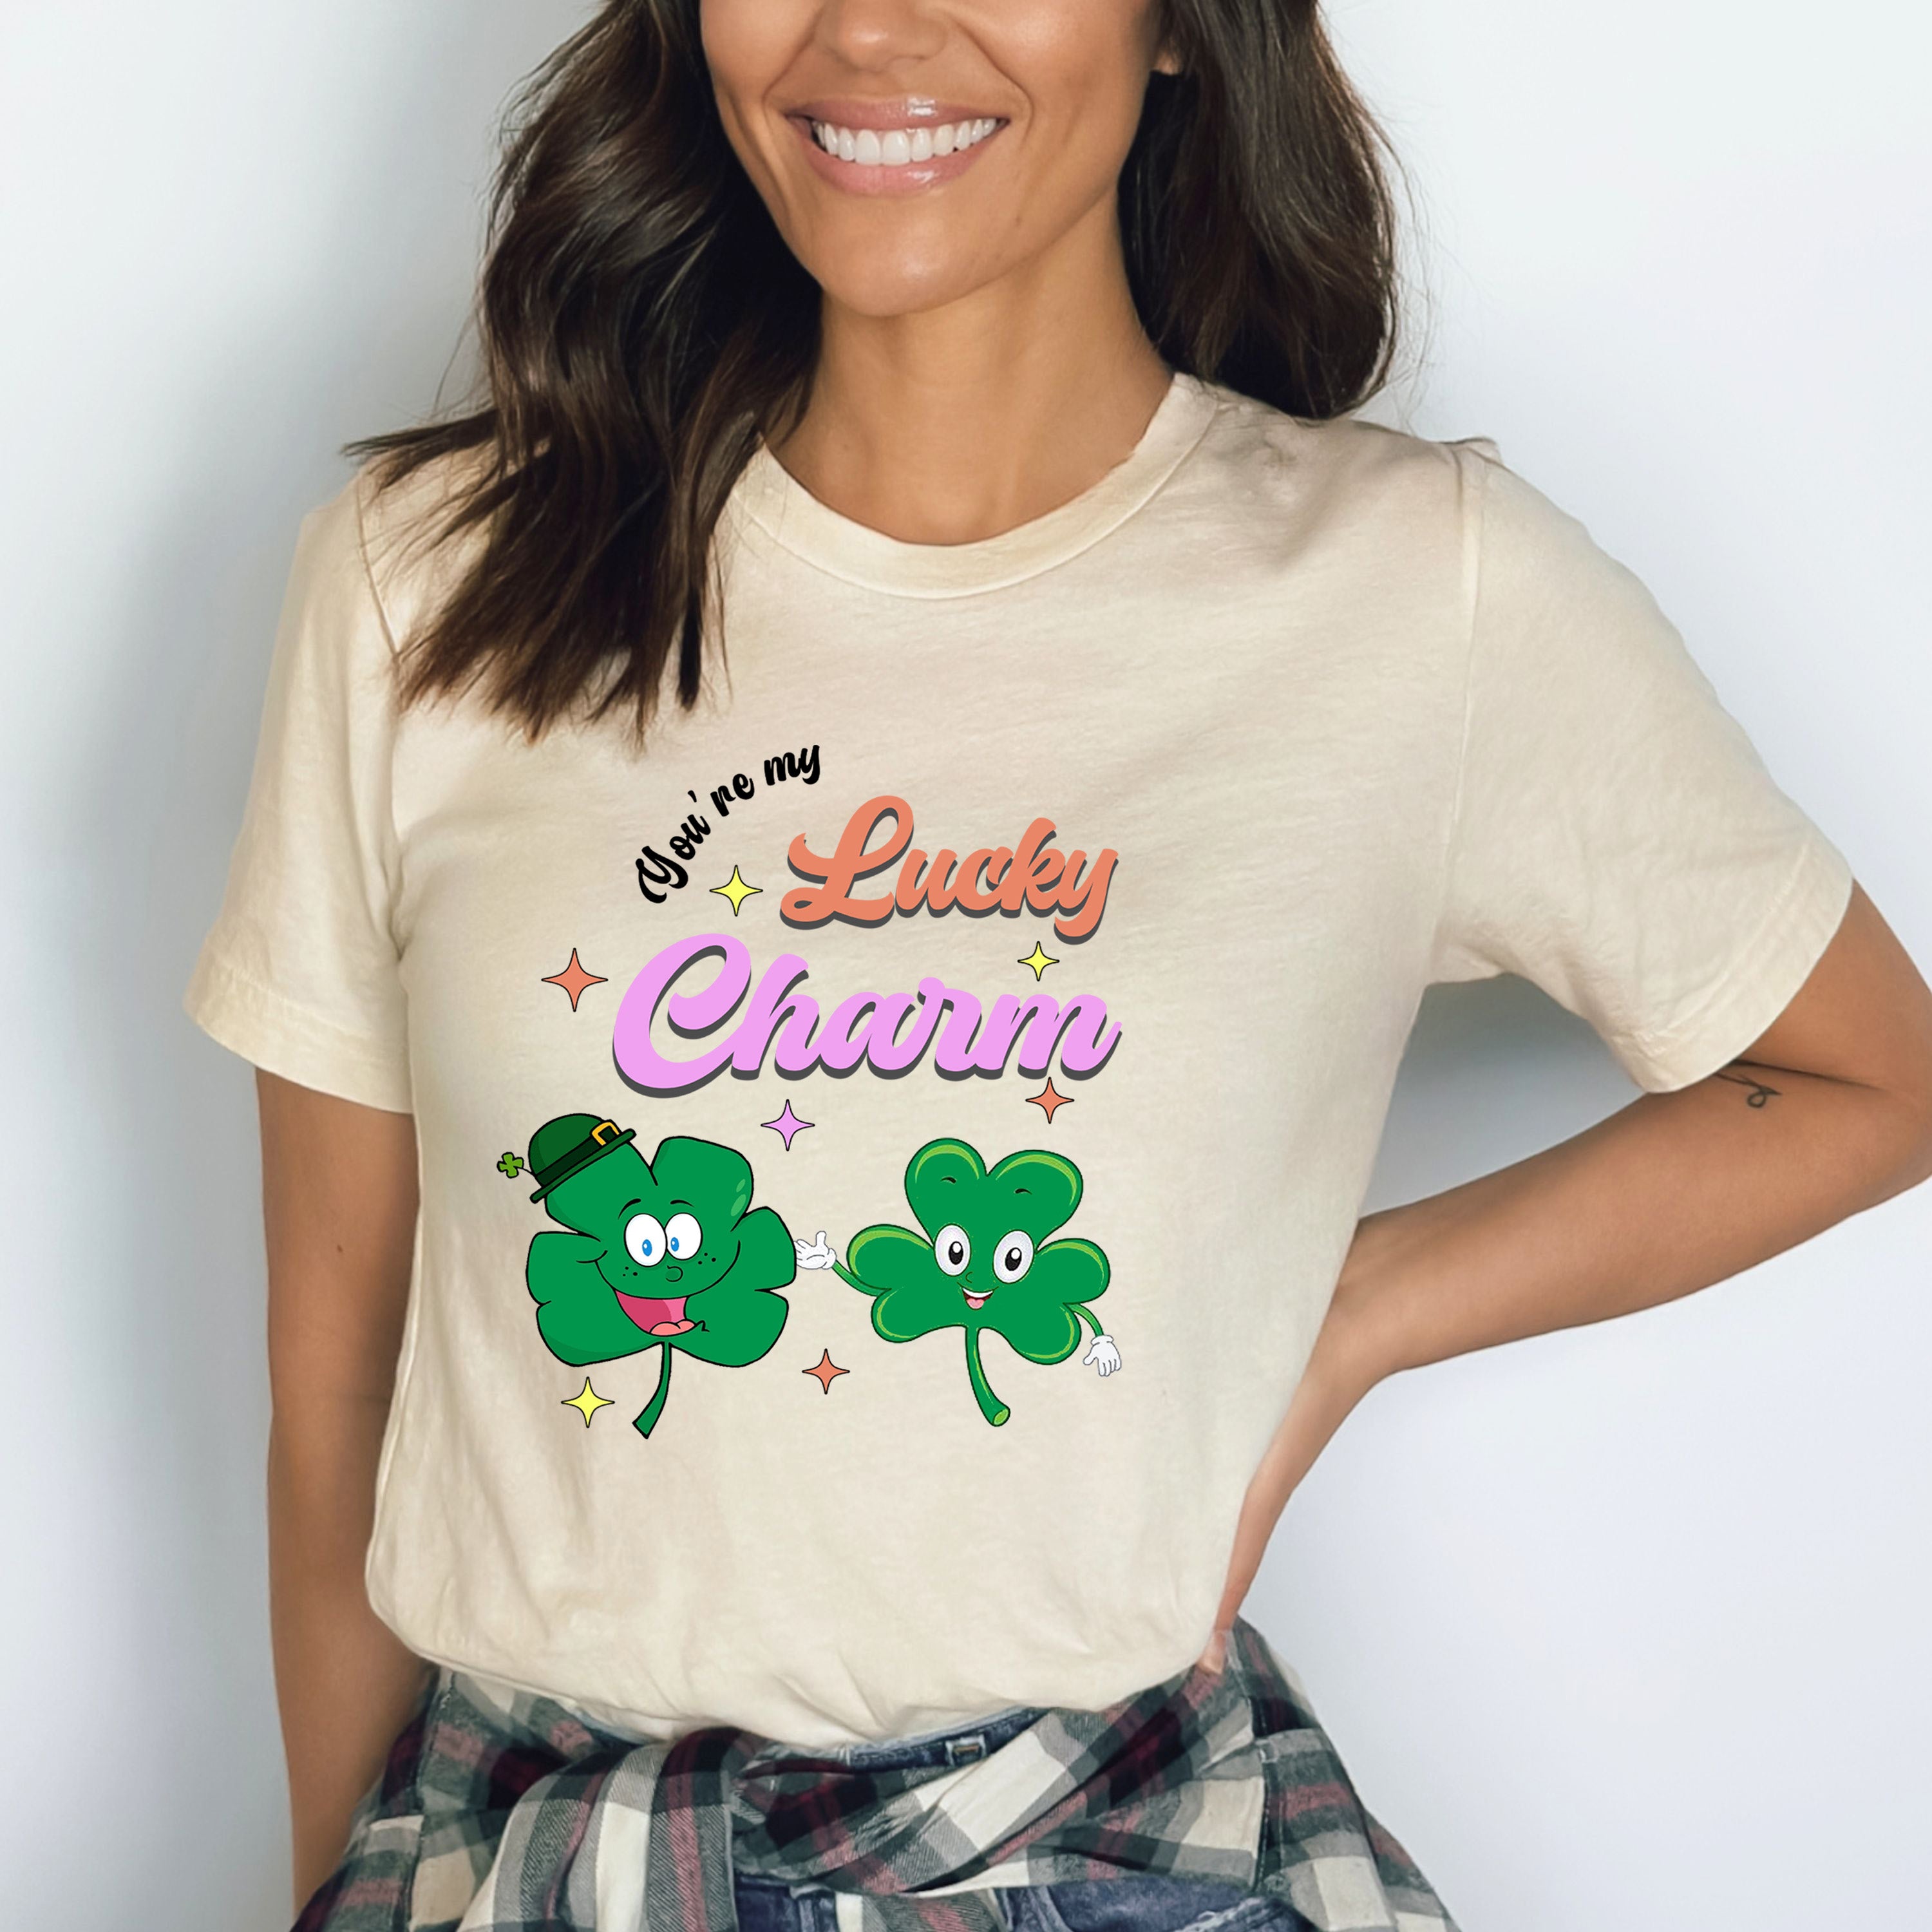 You're My Lucky Charm - Bella canvas